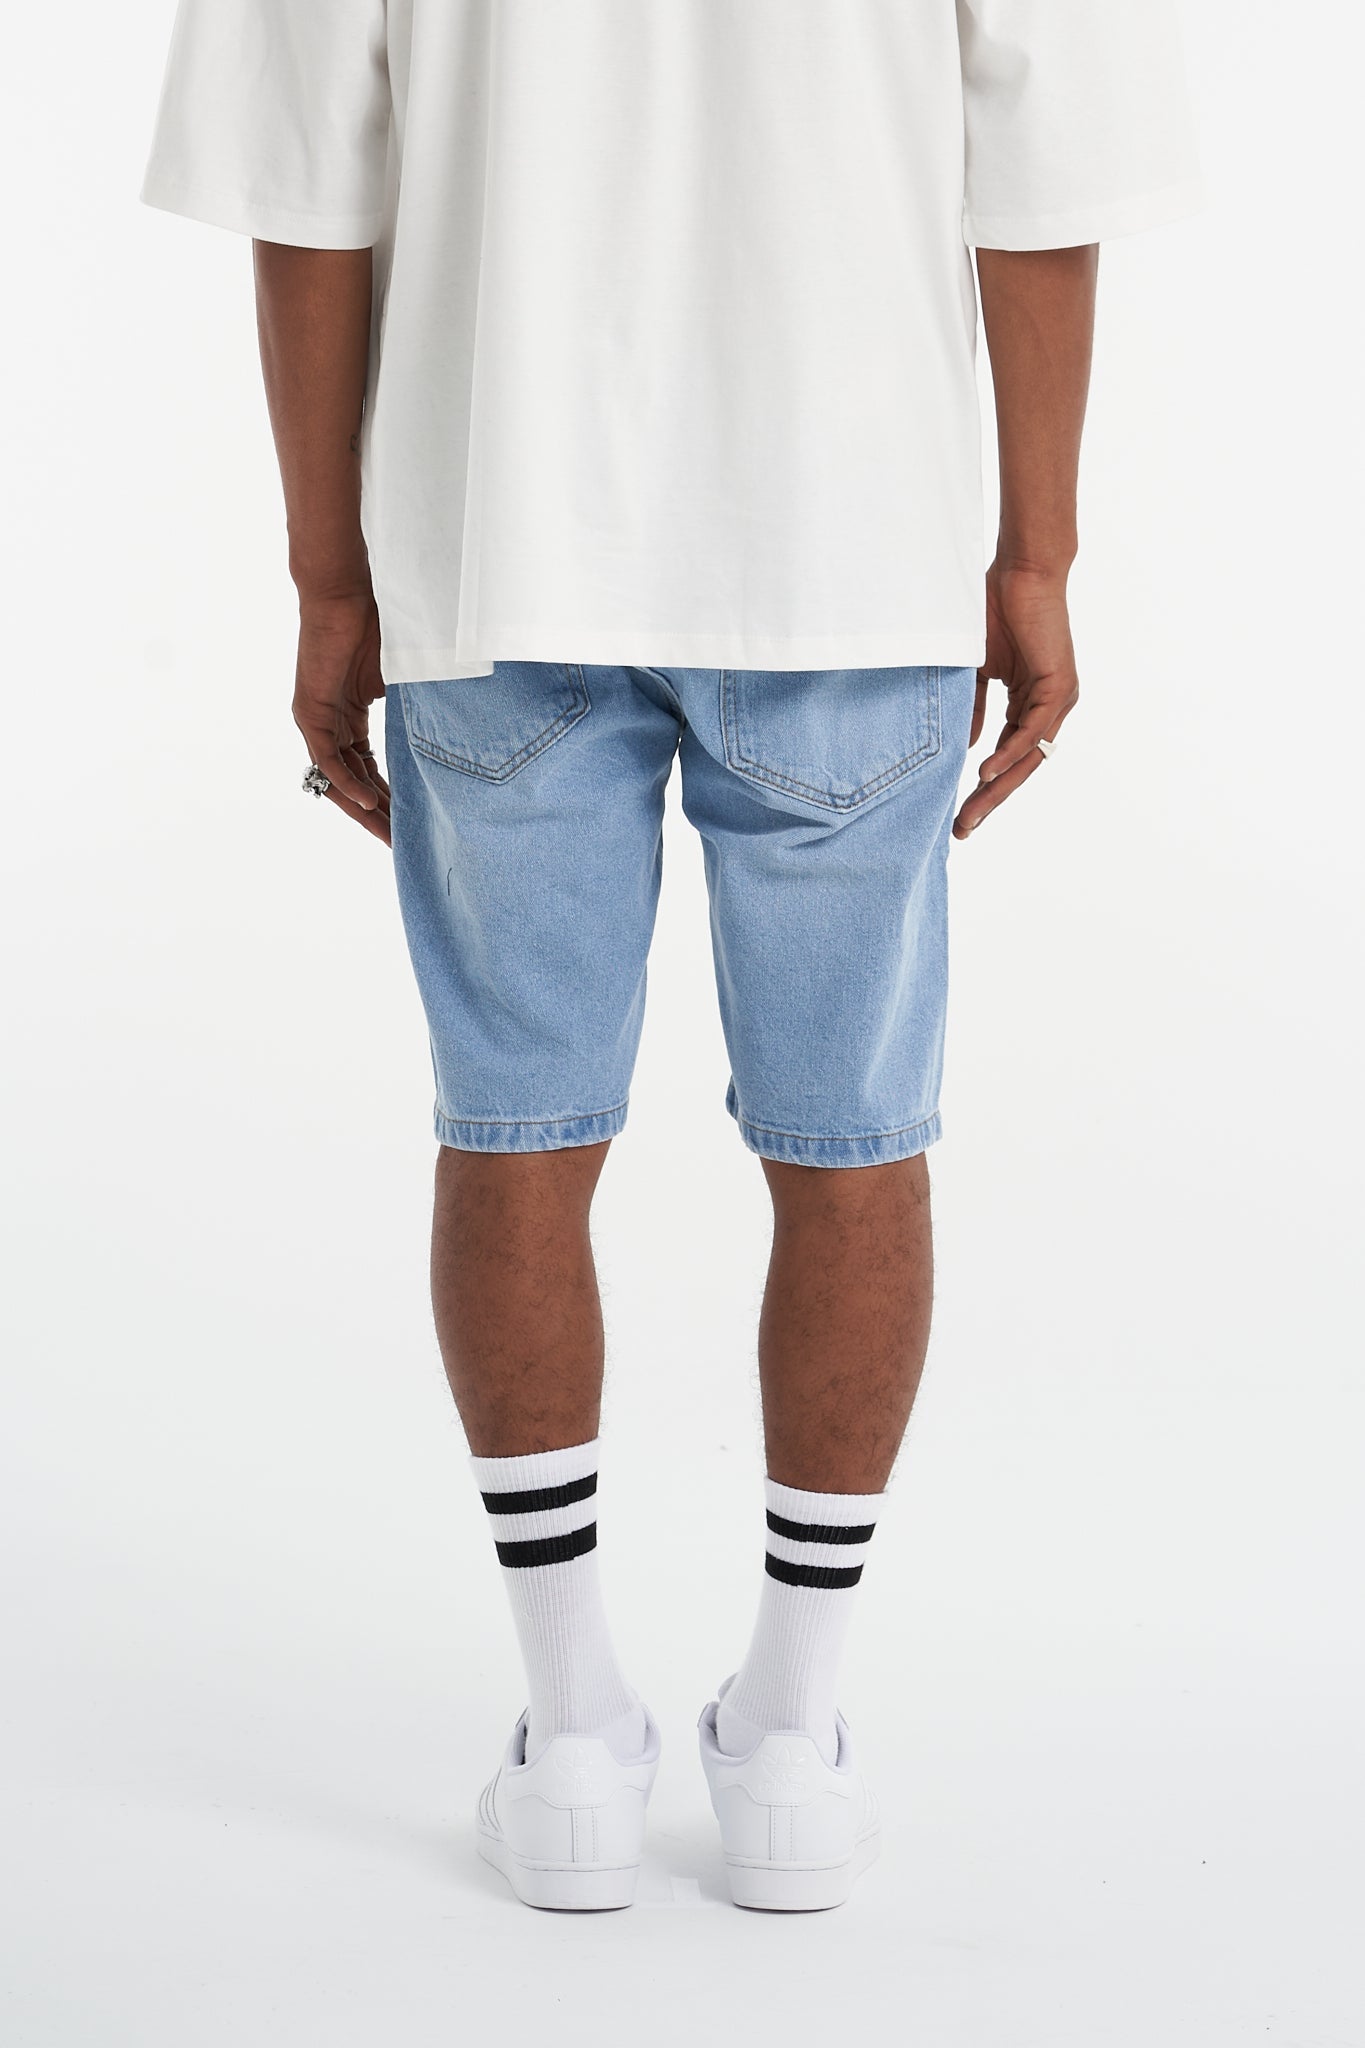 LA Patch Work Blue Ripped Shorts - UNEFFECTED STUDIOS® - Shorts - UNEFFECTED STUDIOS®